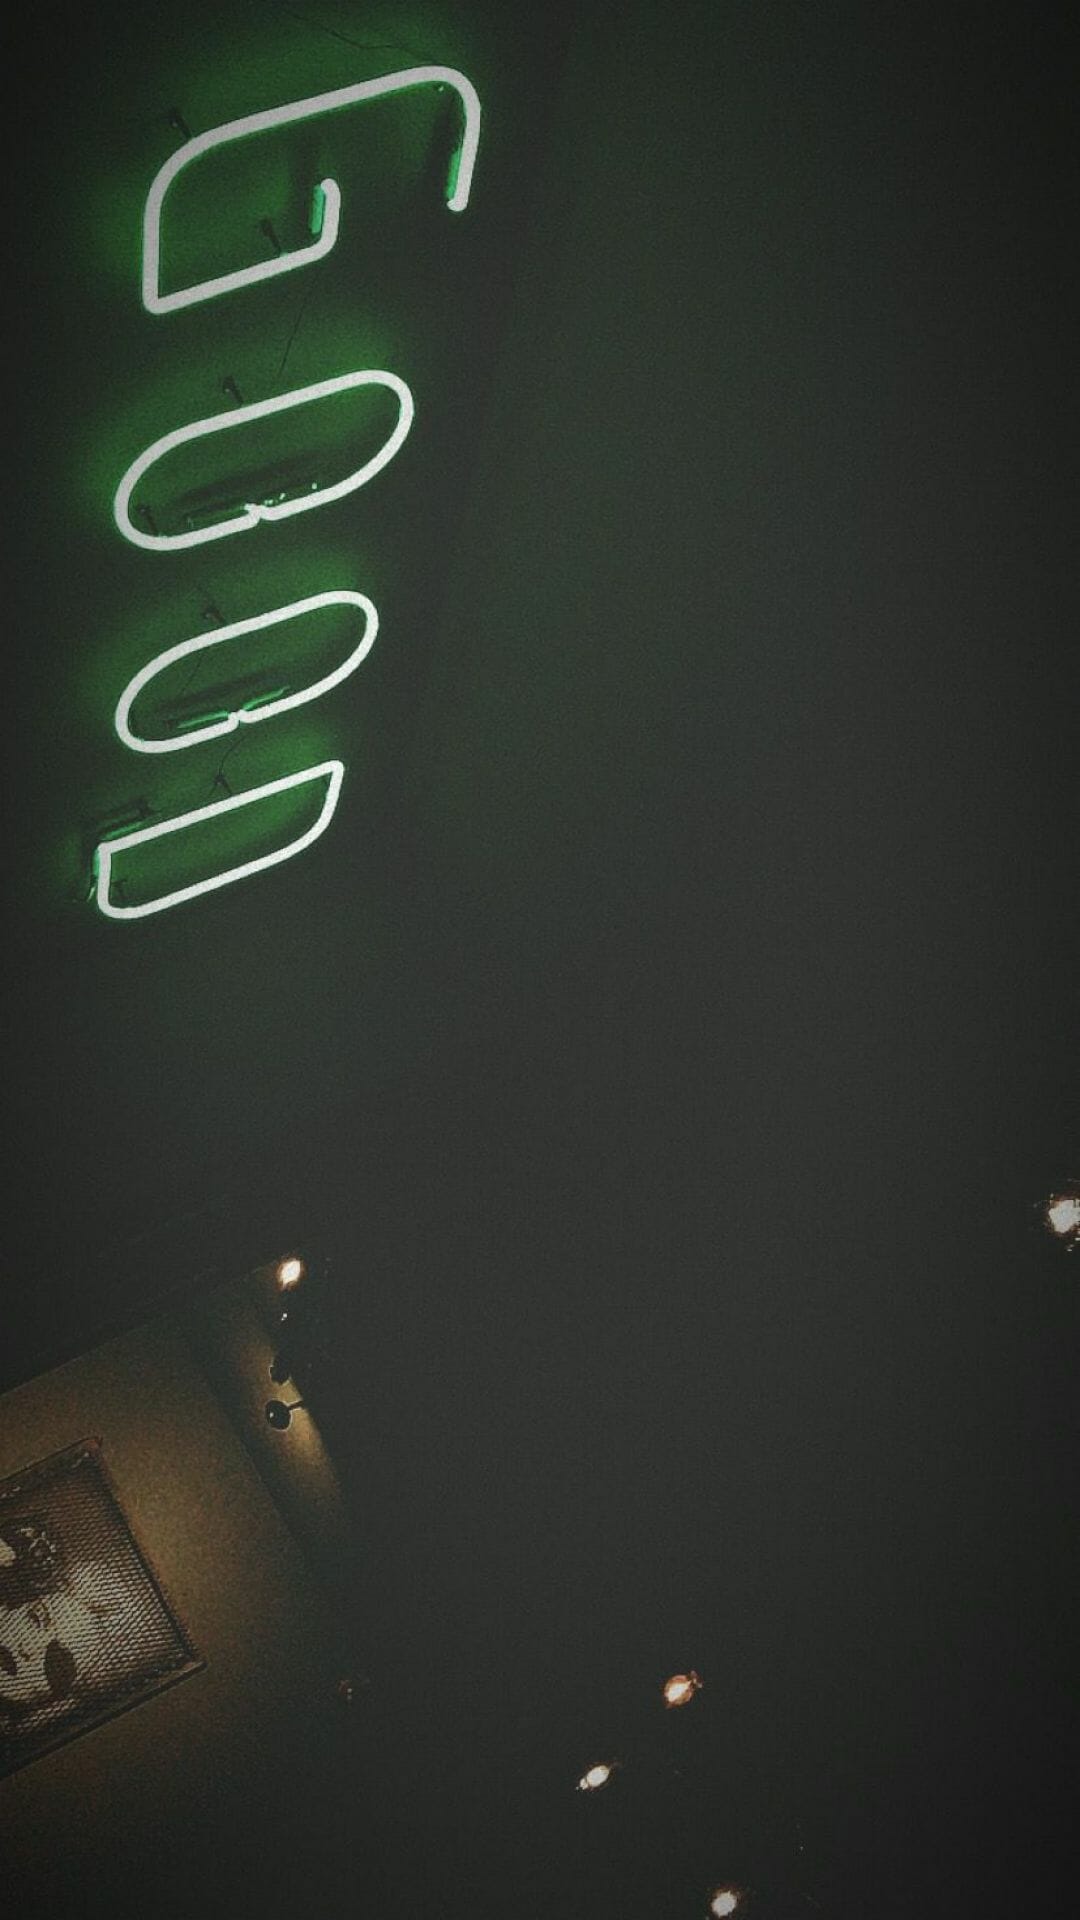 A neon sign that says good in the dark - Dark green, lime green, neon green